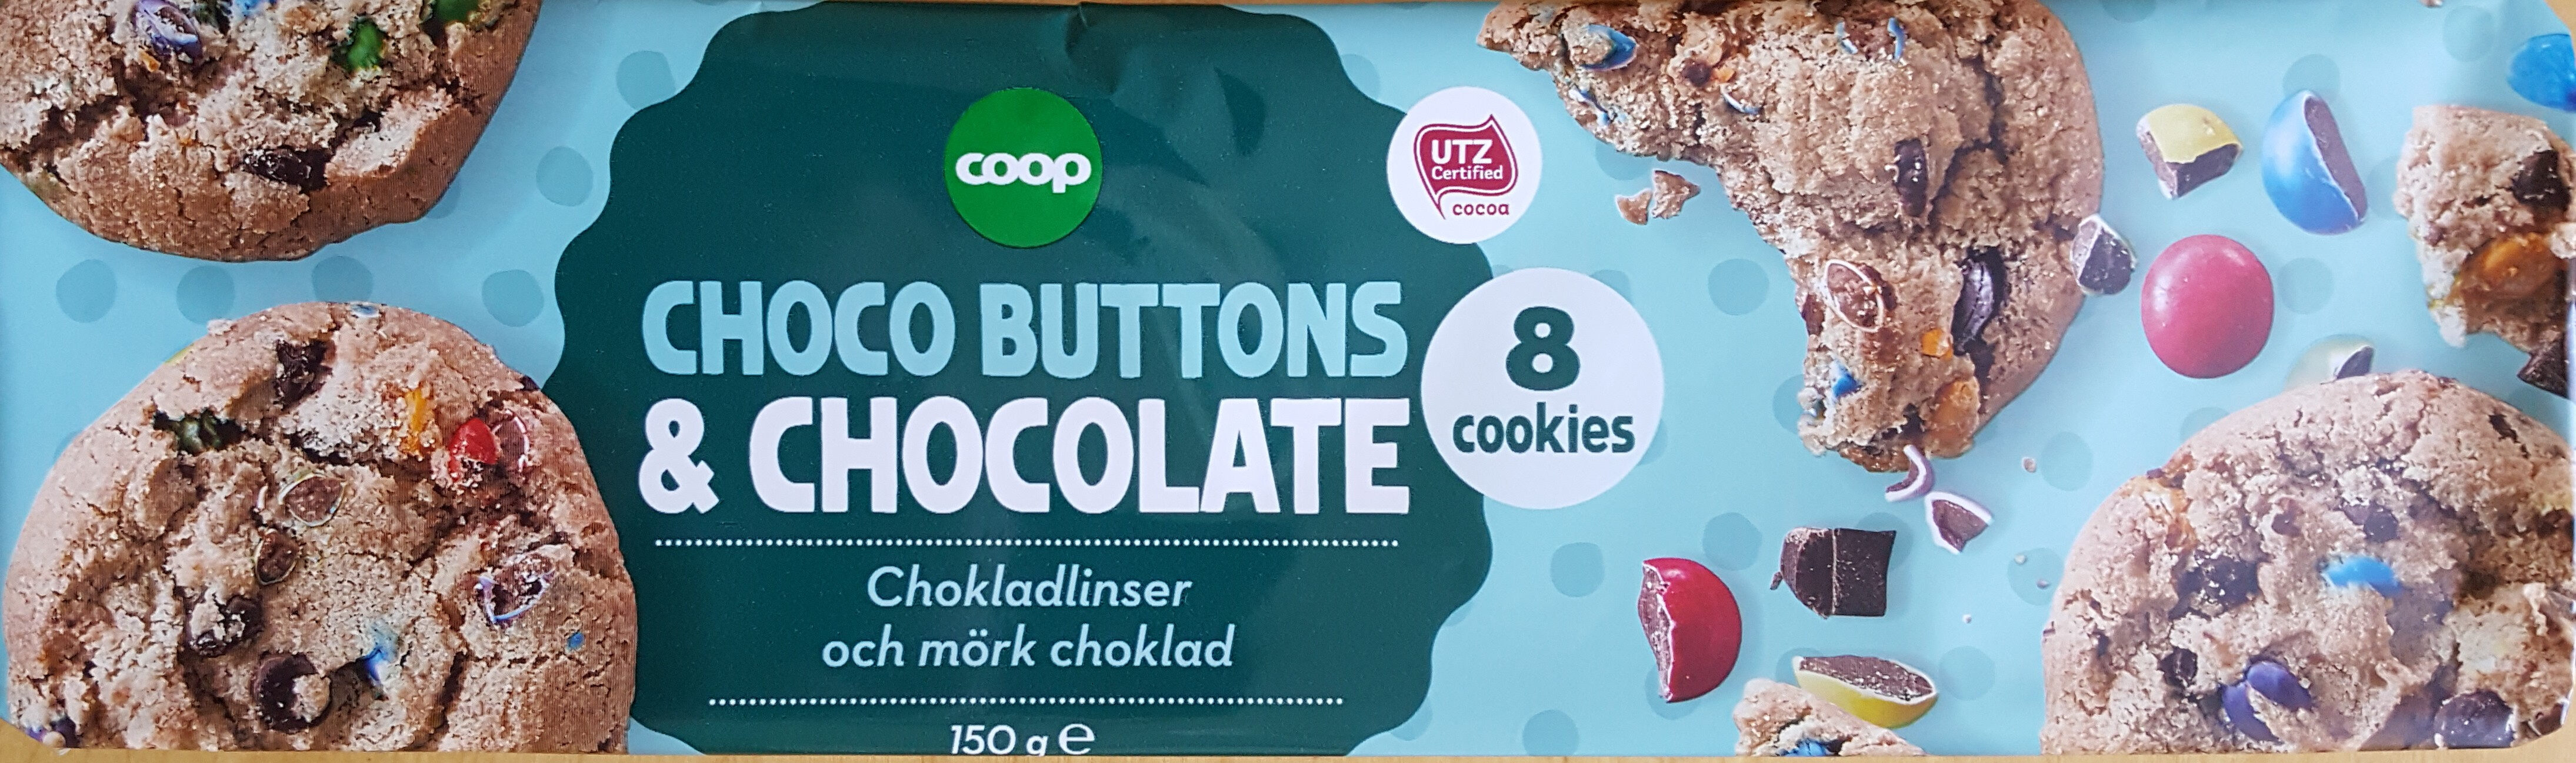 Choco Buttons & Chocolate Cookies - Produkt - sv